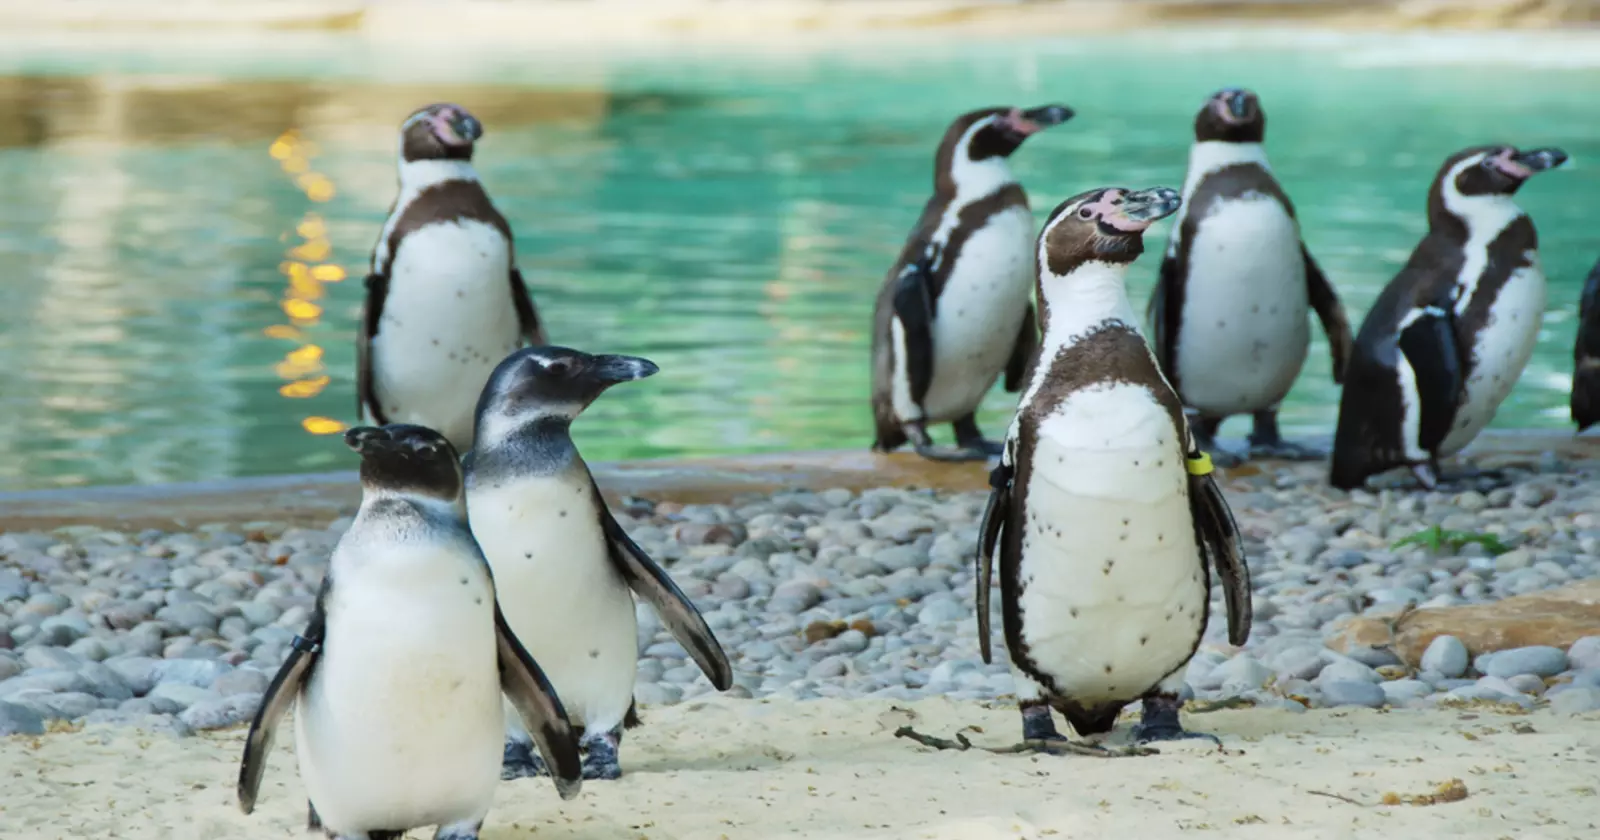 Group of Humboldt penguins at London Zoo 